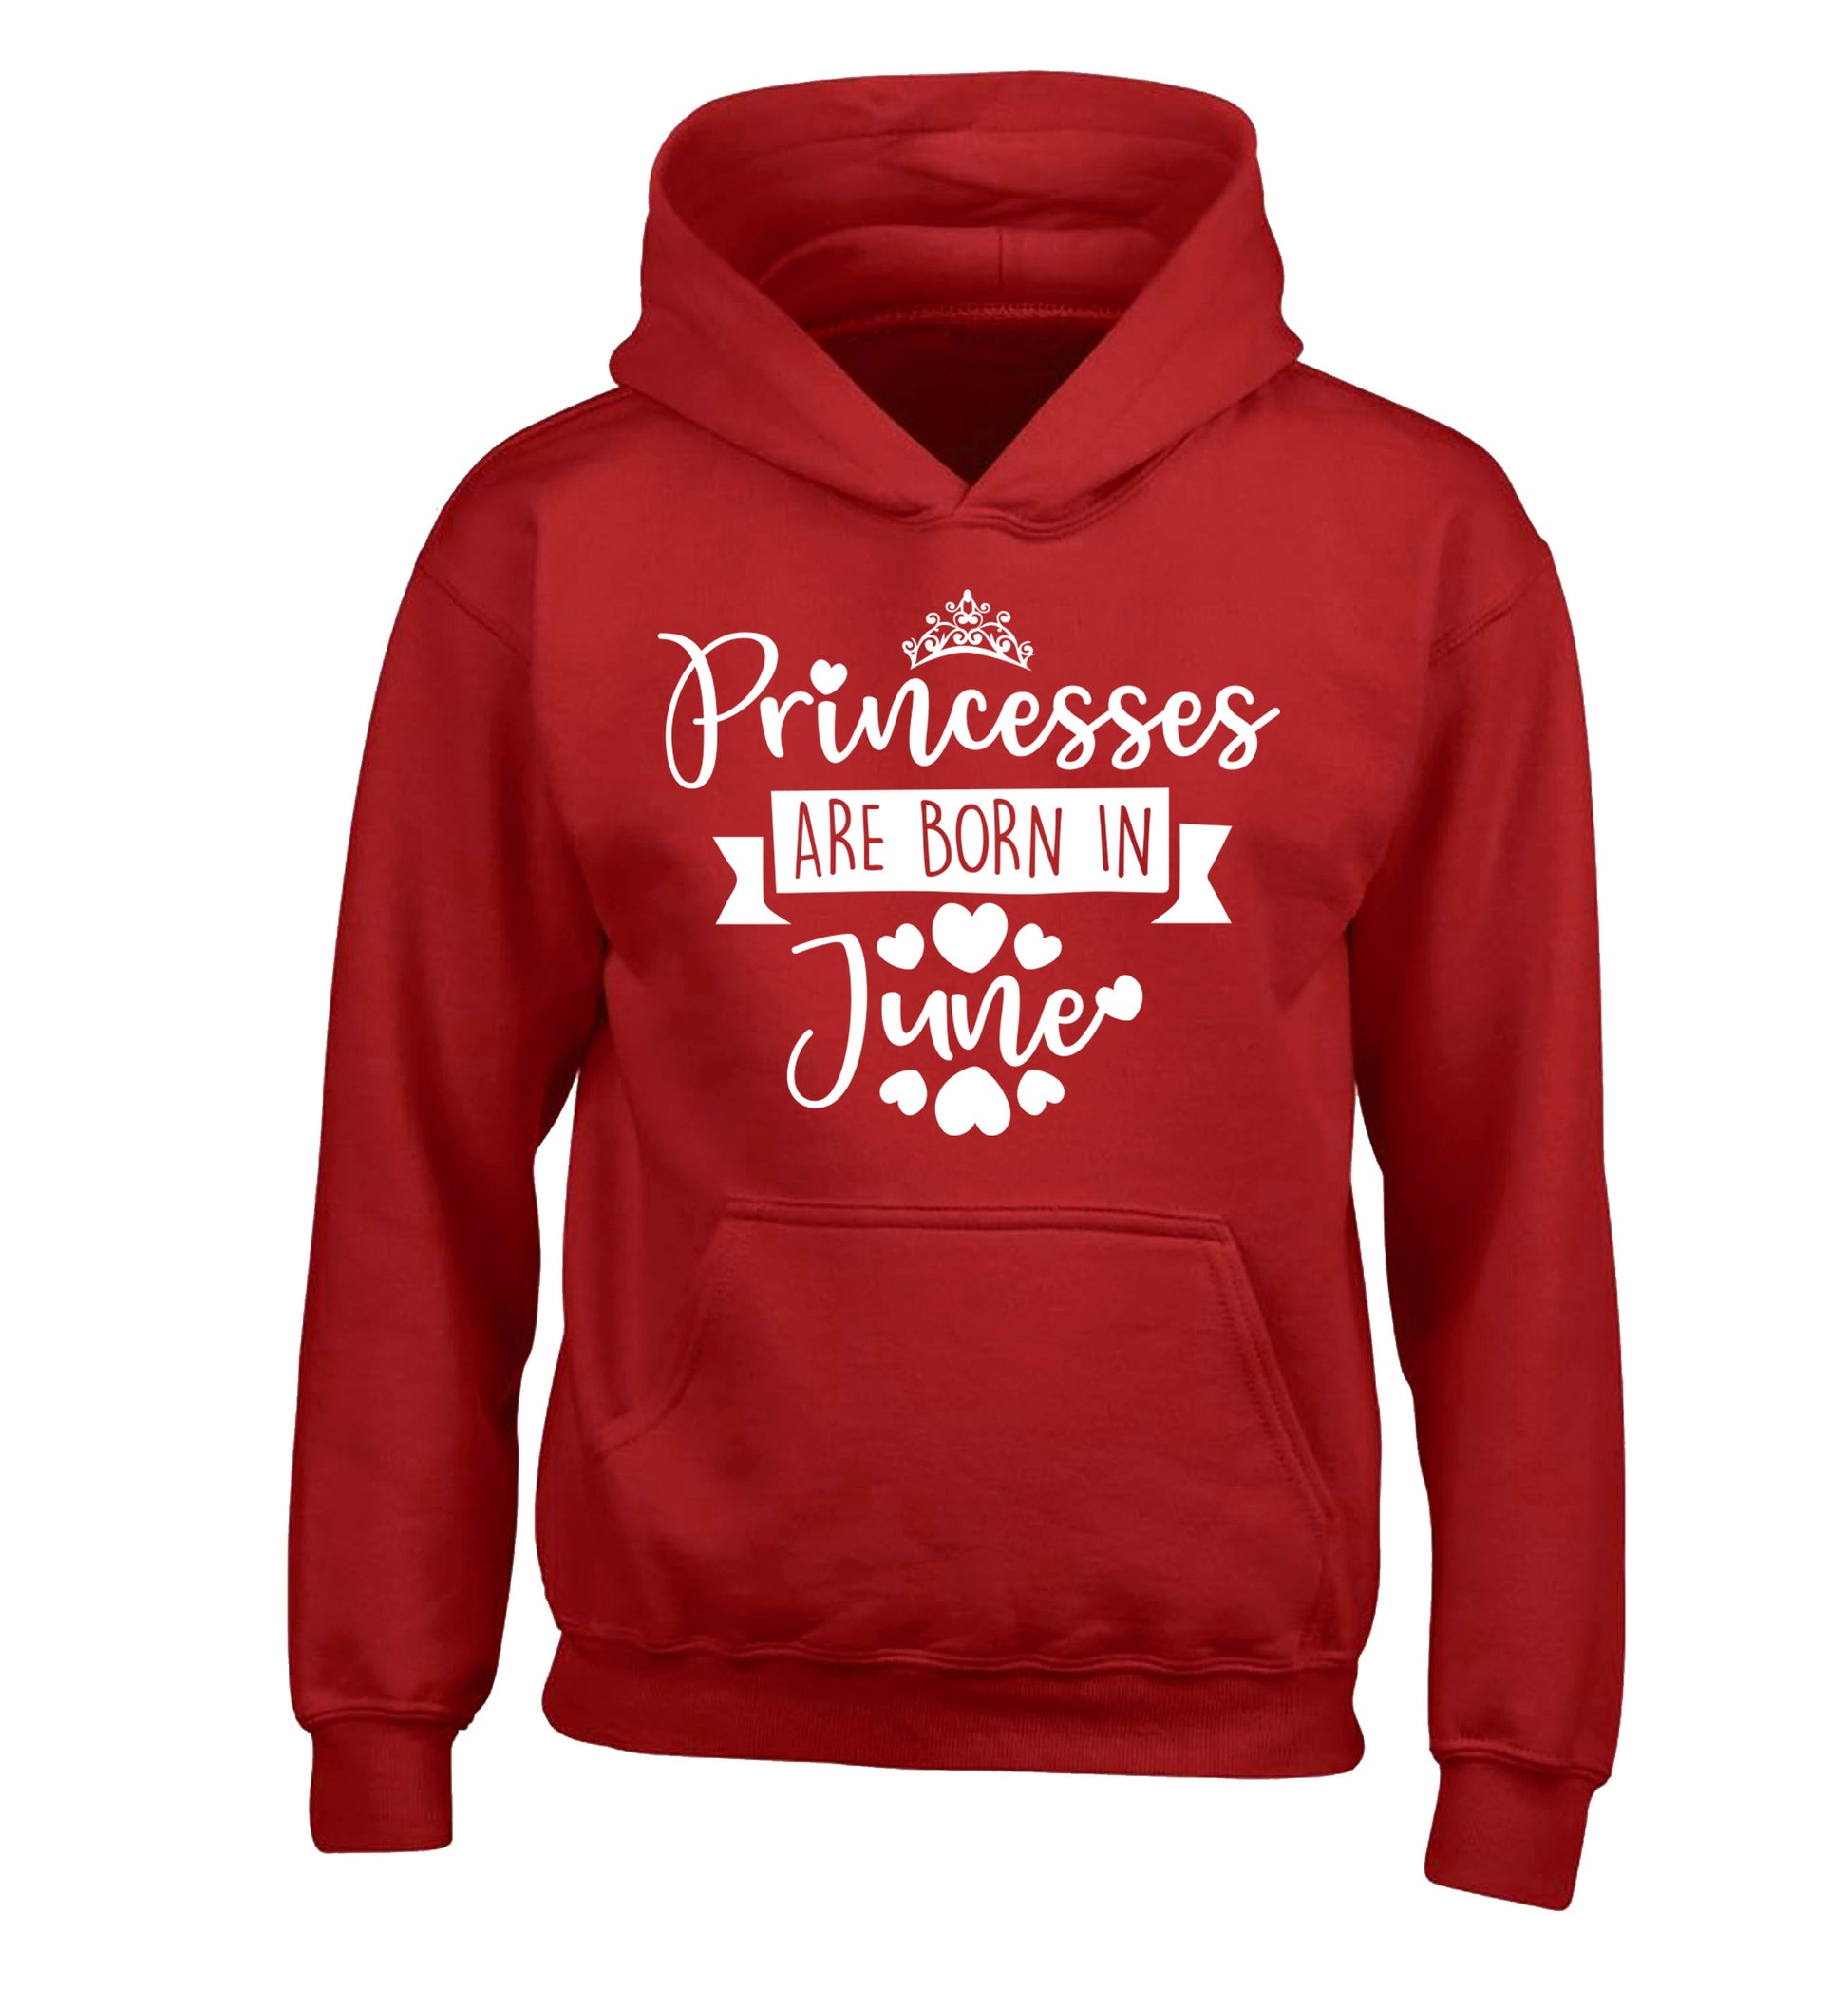 Princesses are born in June children's red hoodie 12-13 Years